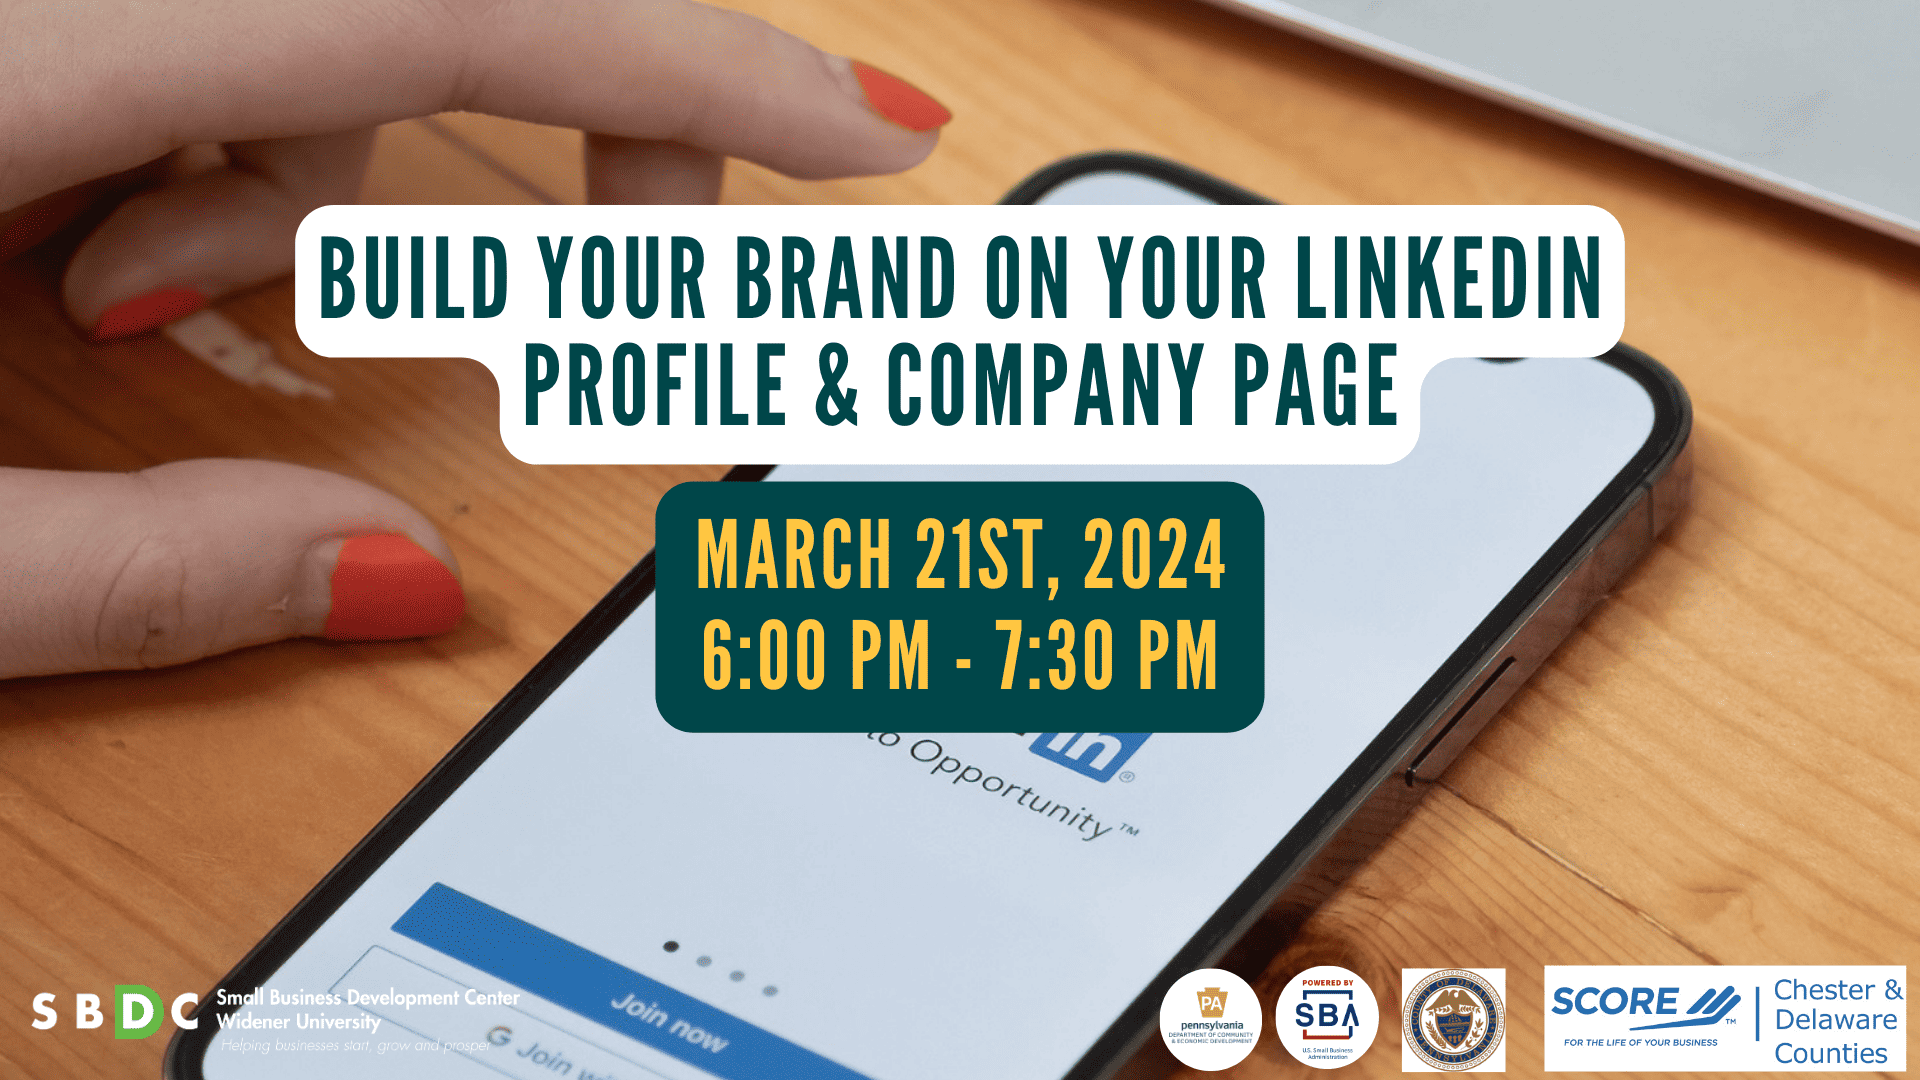 Build Your Brand on Your LinkedIn Profile & Company Page